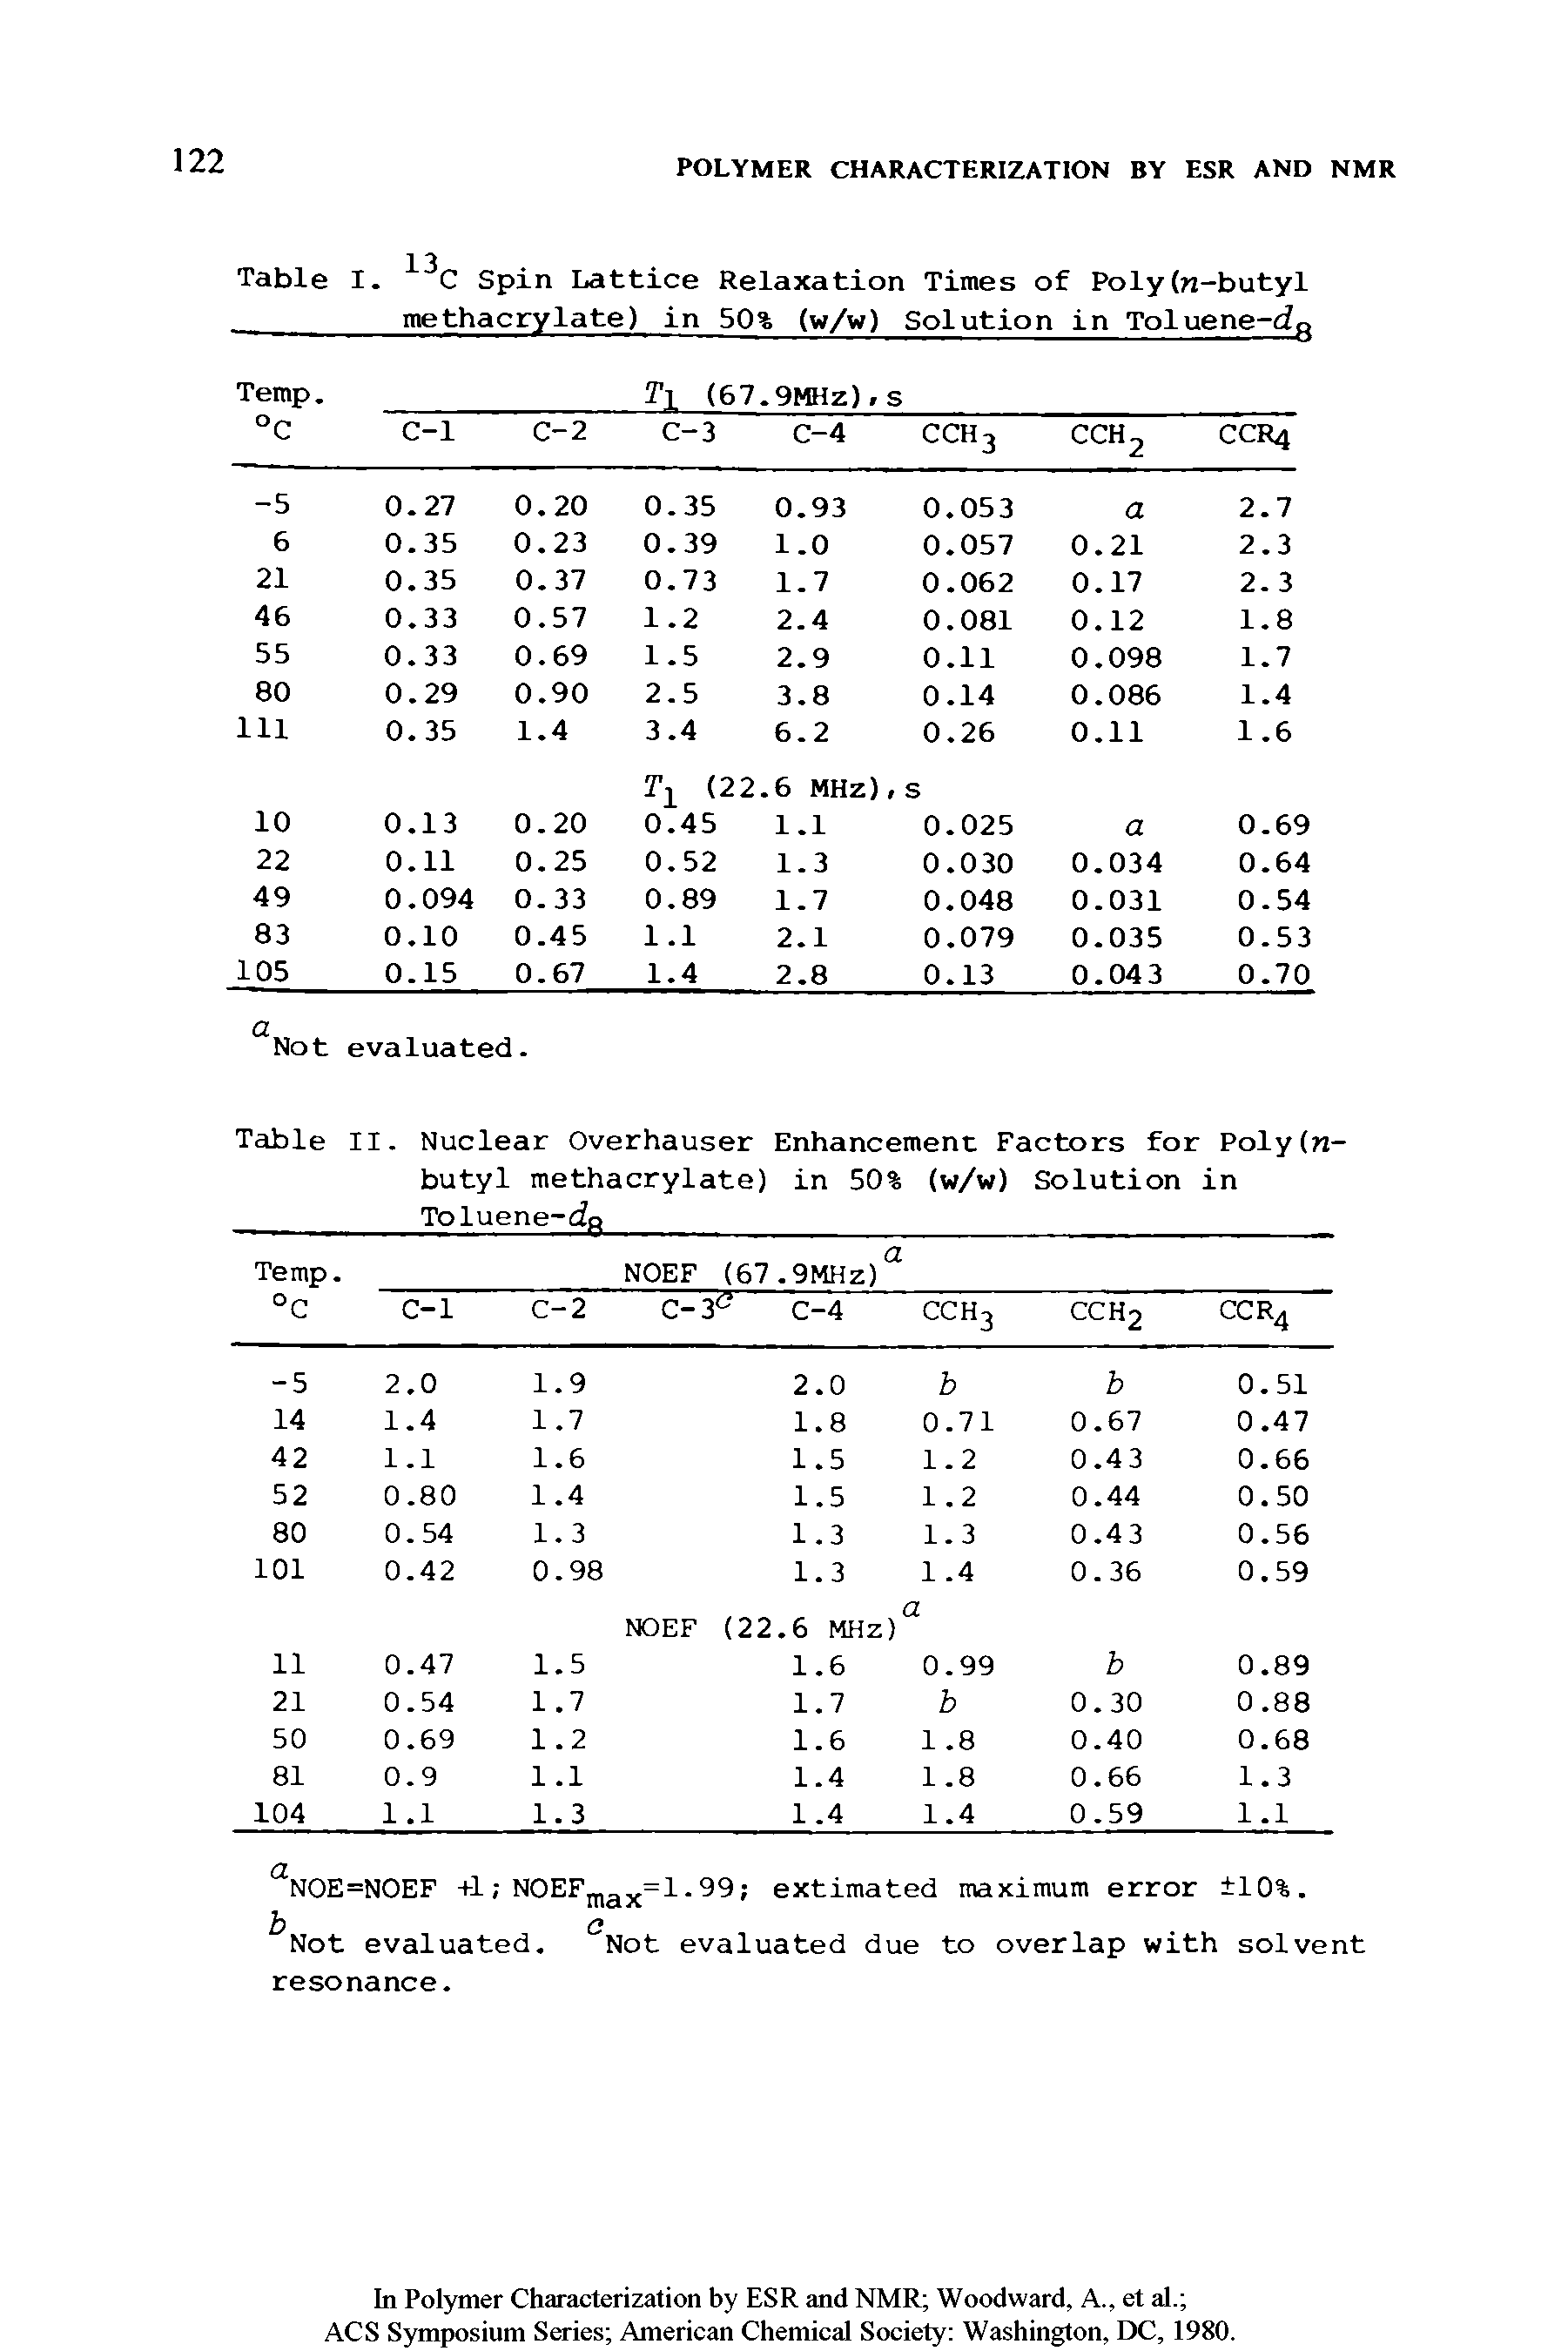 Table I. 13C Spin Lattice Relaxation Times of Poly(w-butyl...